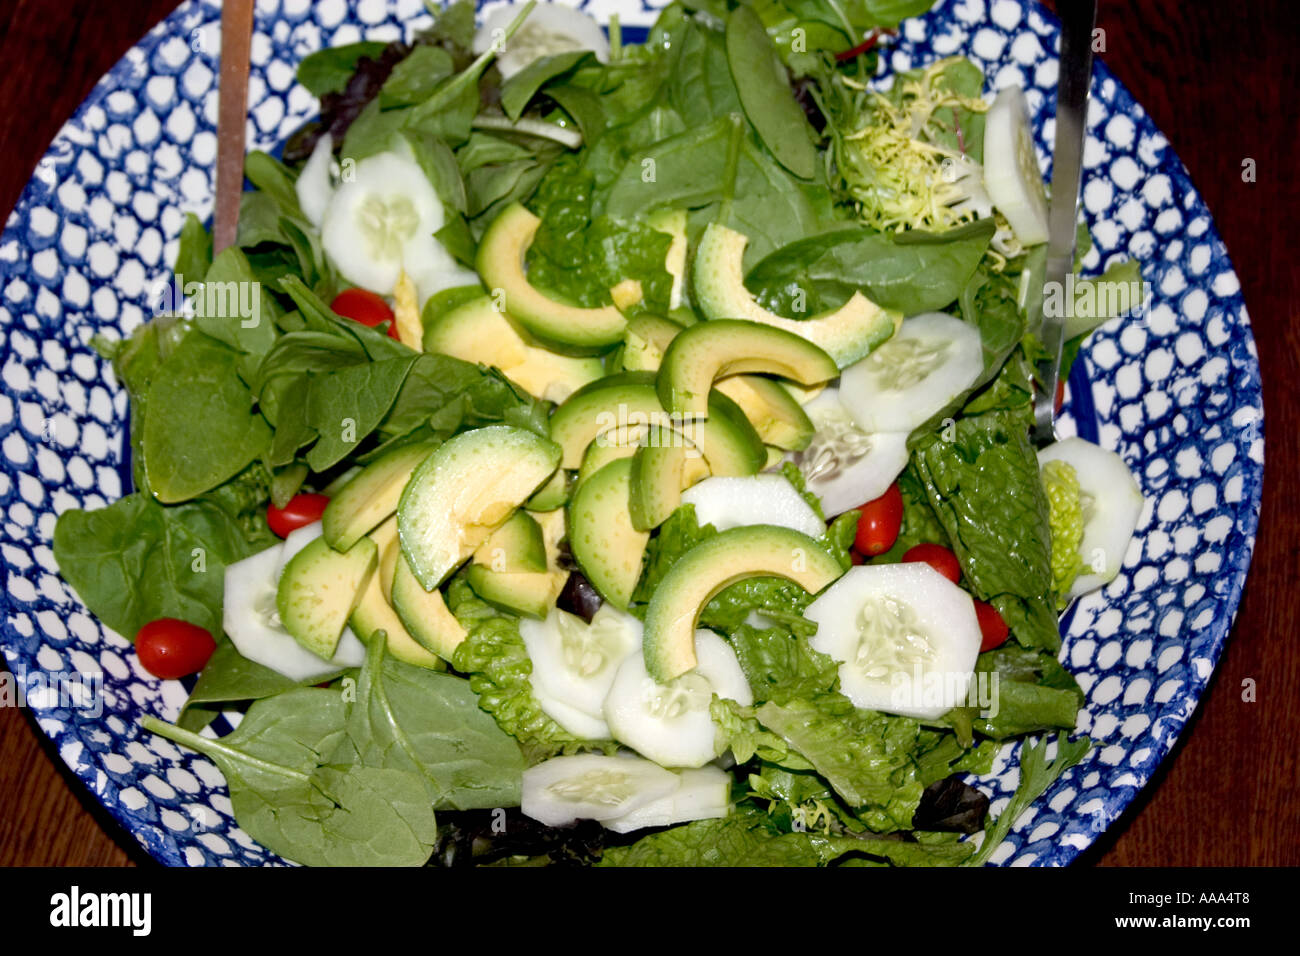 Salad bowl of avocados spinach cherry tomatoes cucumbers and lettuce  healthy food concept. St Paul Minnesota MN USA Stock Photo - Alamy